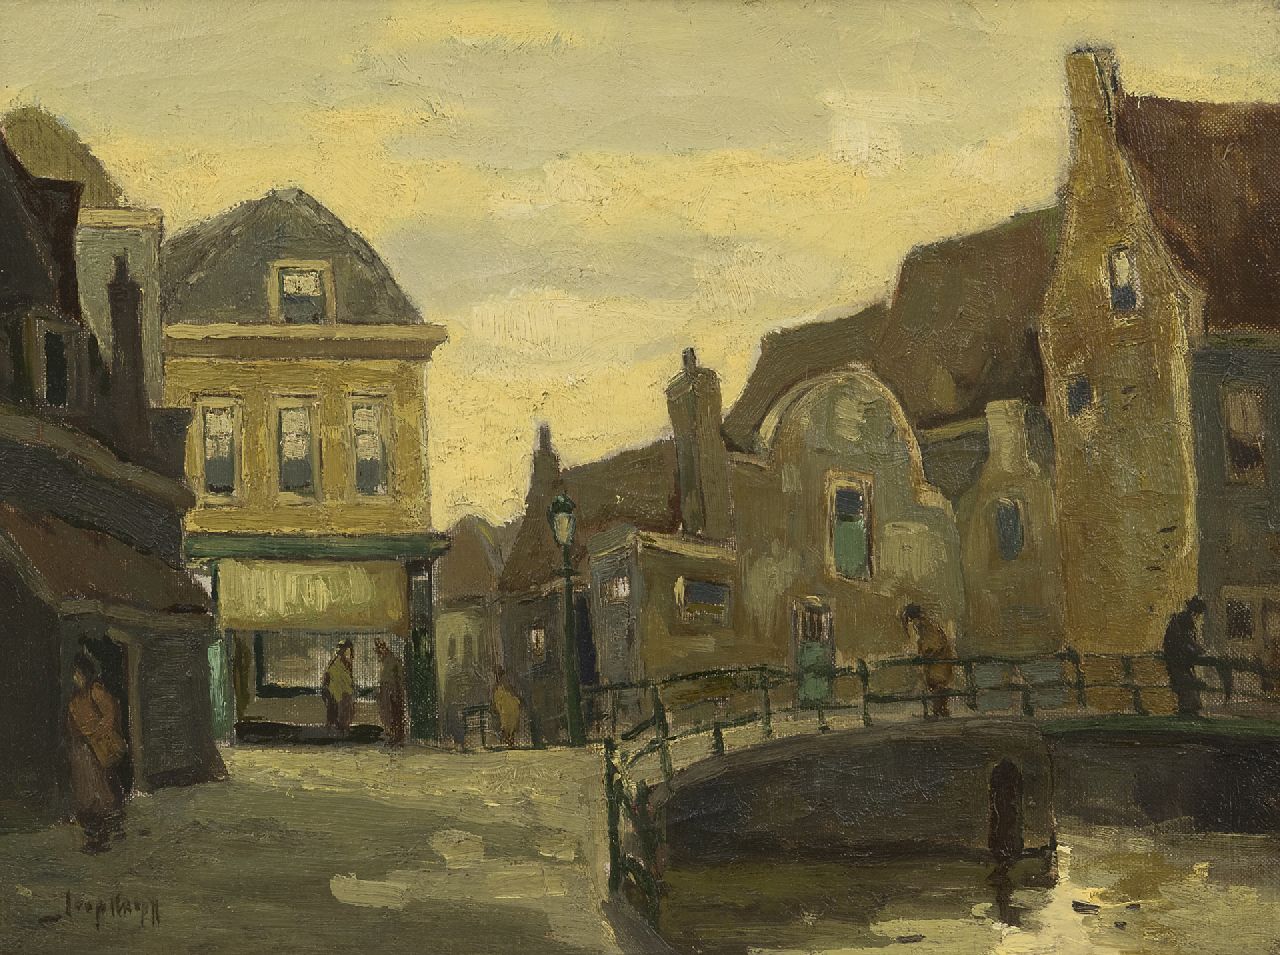 Kropff J.  | Johan 'Joop' Kropff | Paintings offered for sale | A Dutch town, oil on canvas 30.4 x 40.5 cm, signed l.l.